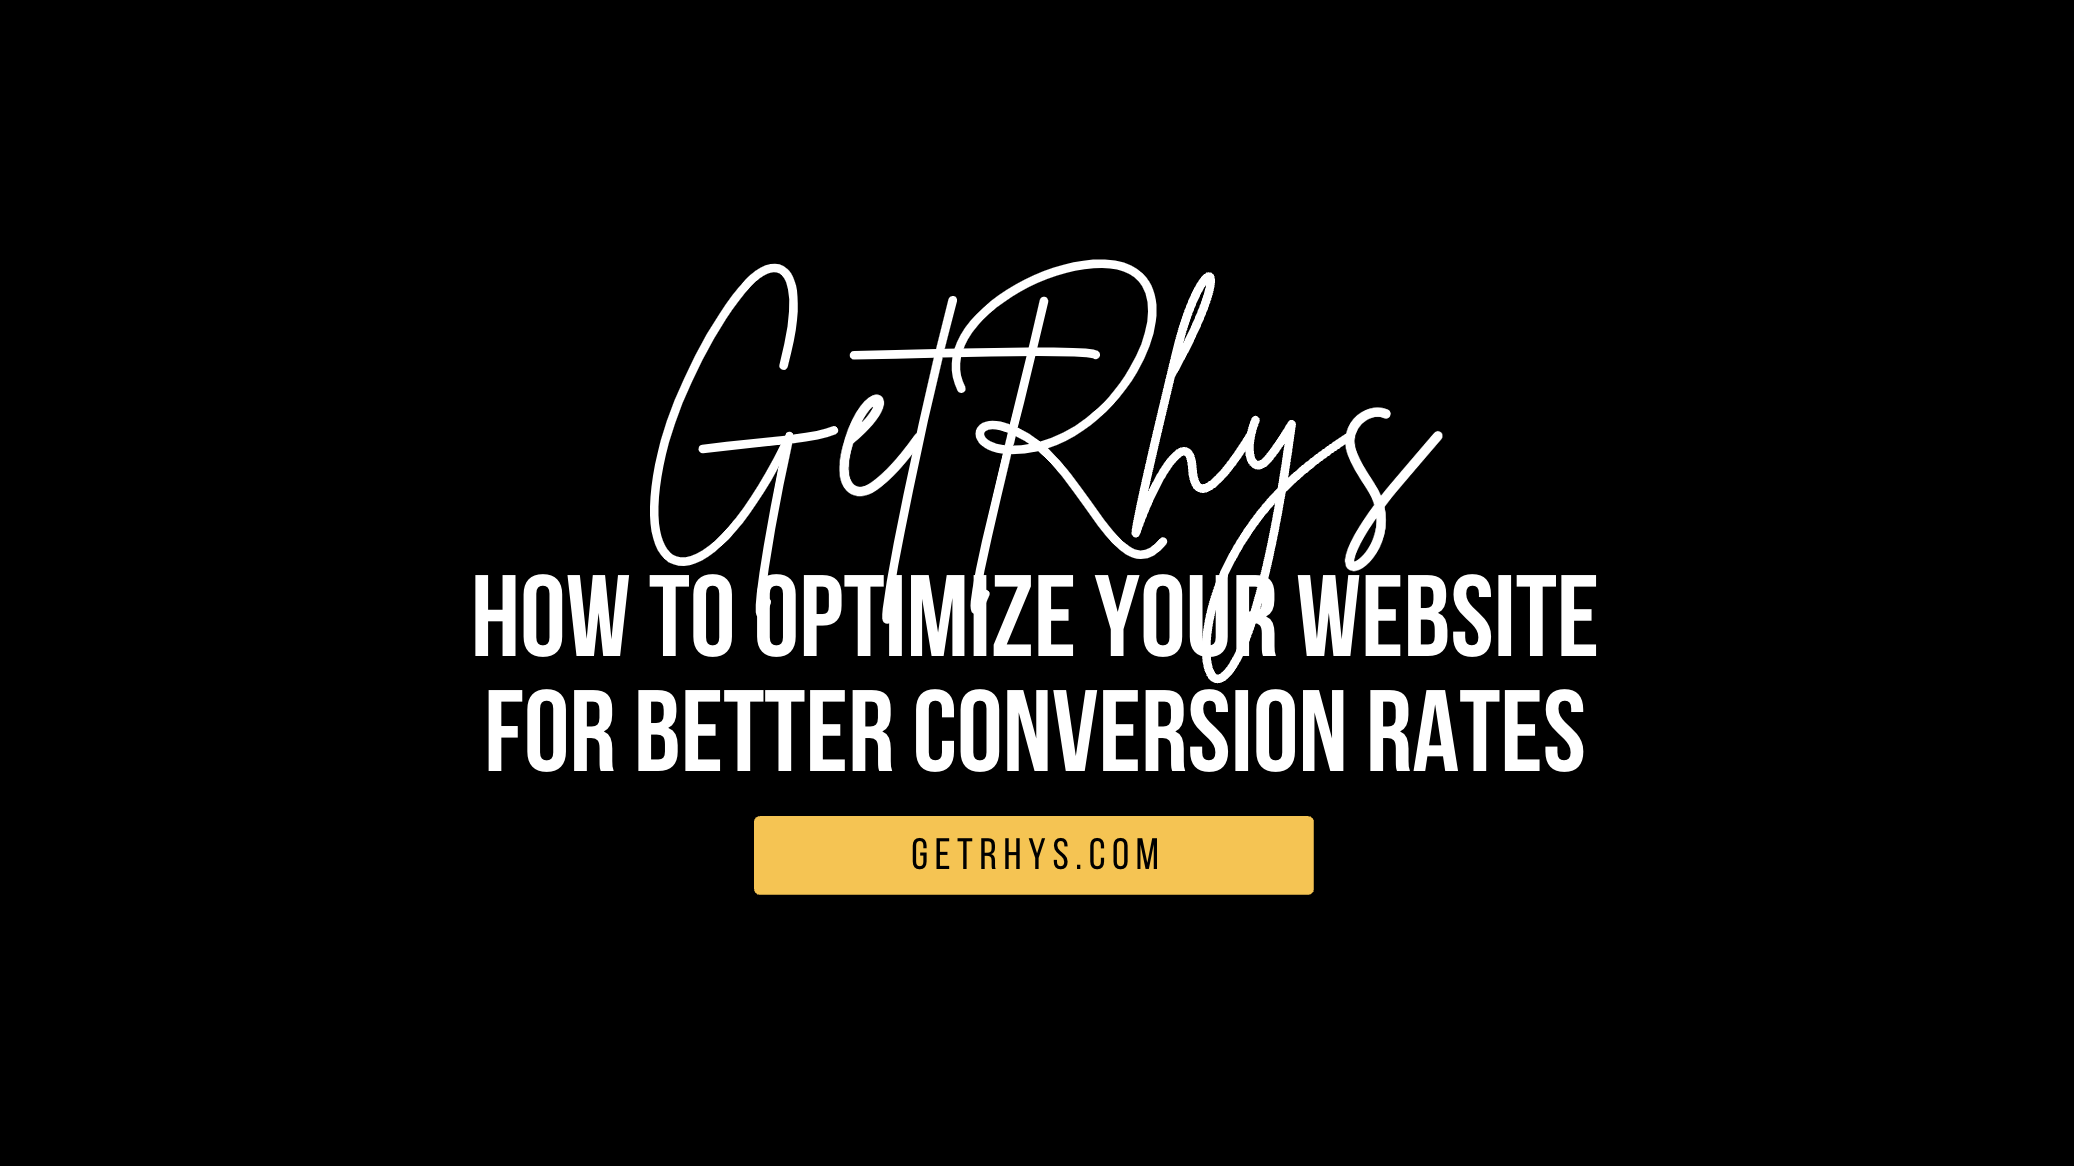 How to optimize your website for better conversion rates